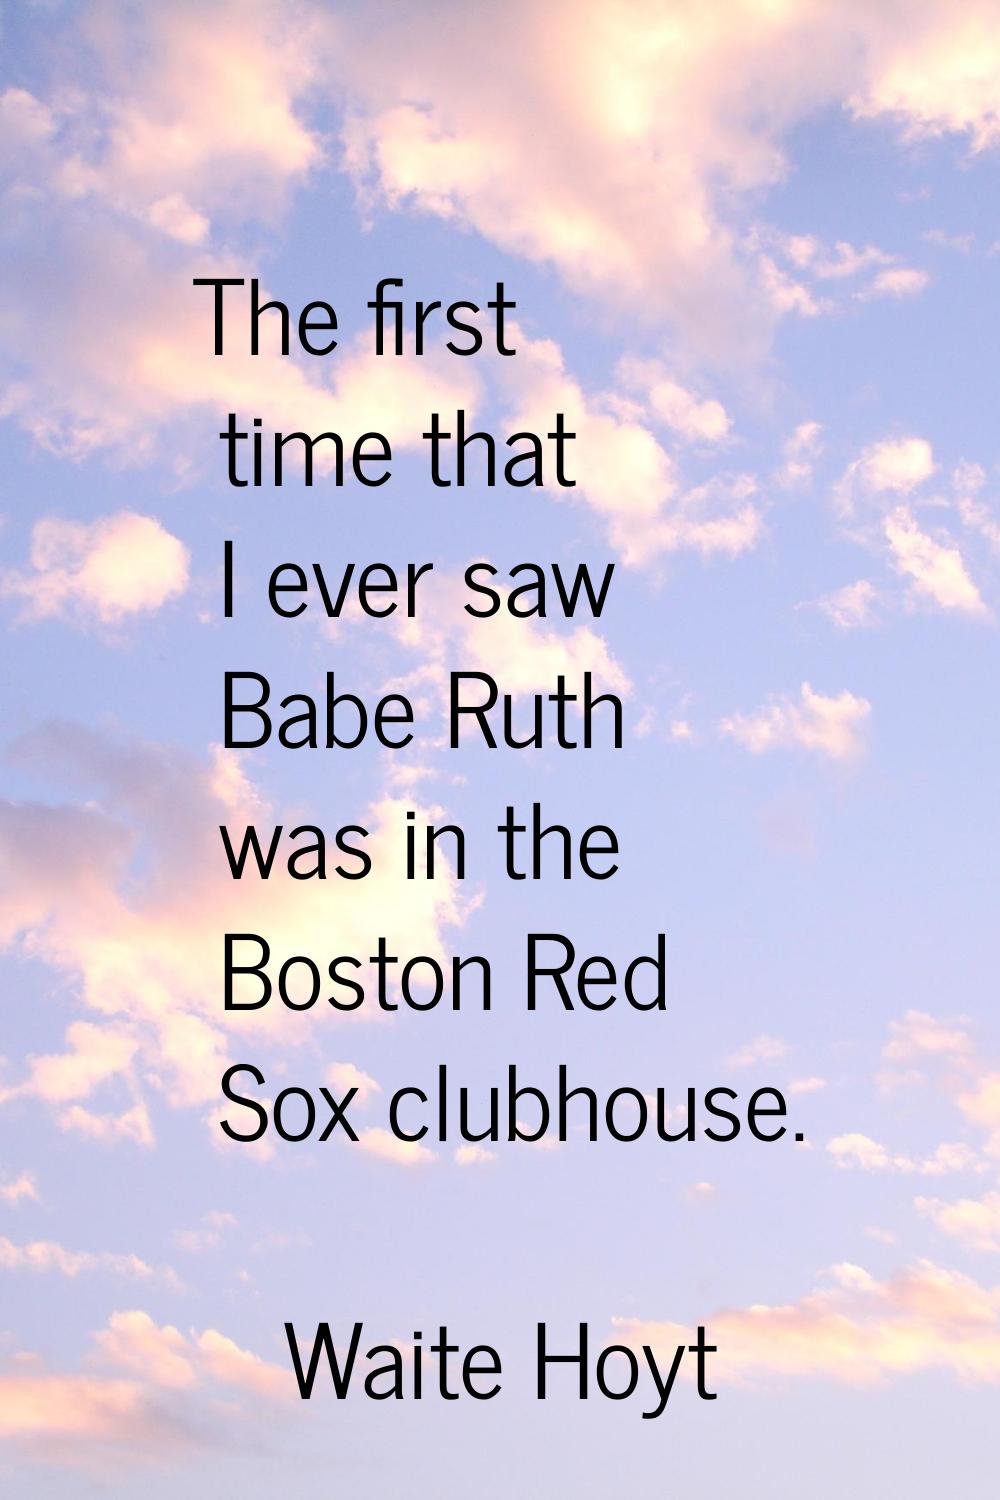 The first time that I ever saw Babe Ruth was in the Boston Red Sox clubhouse.